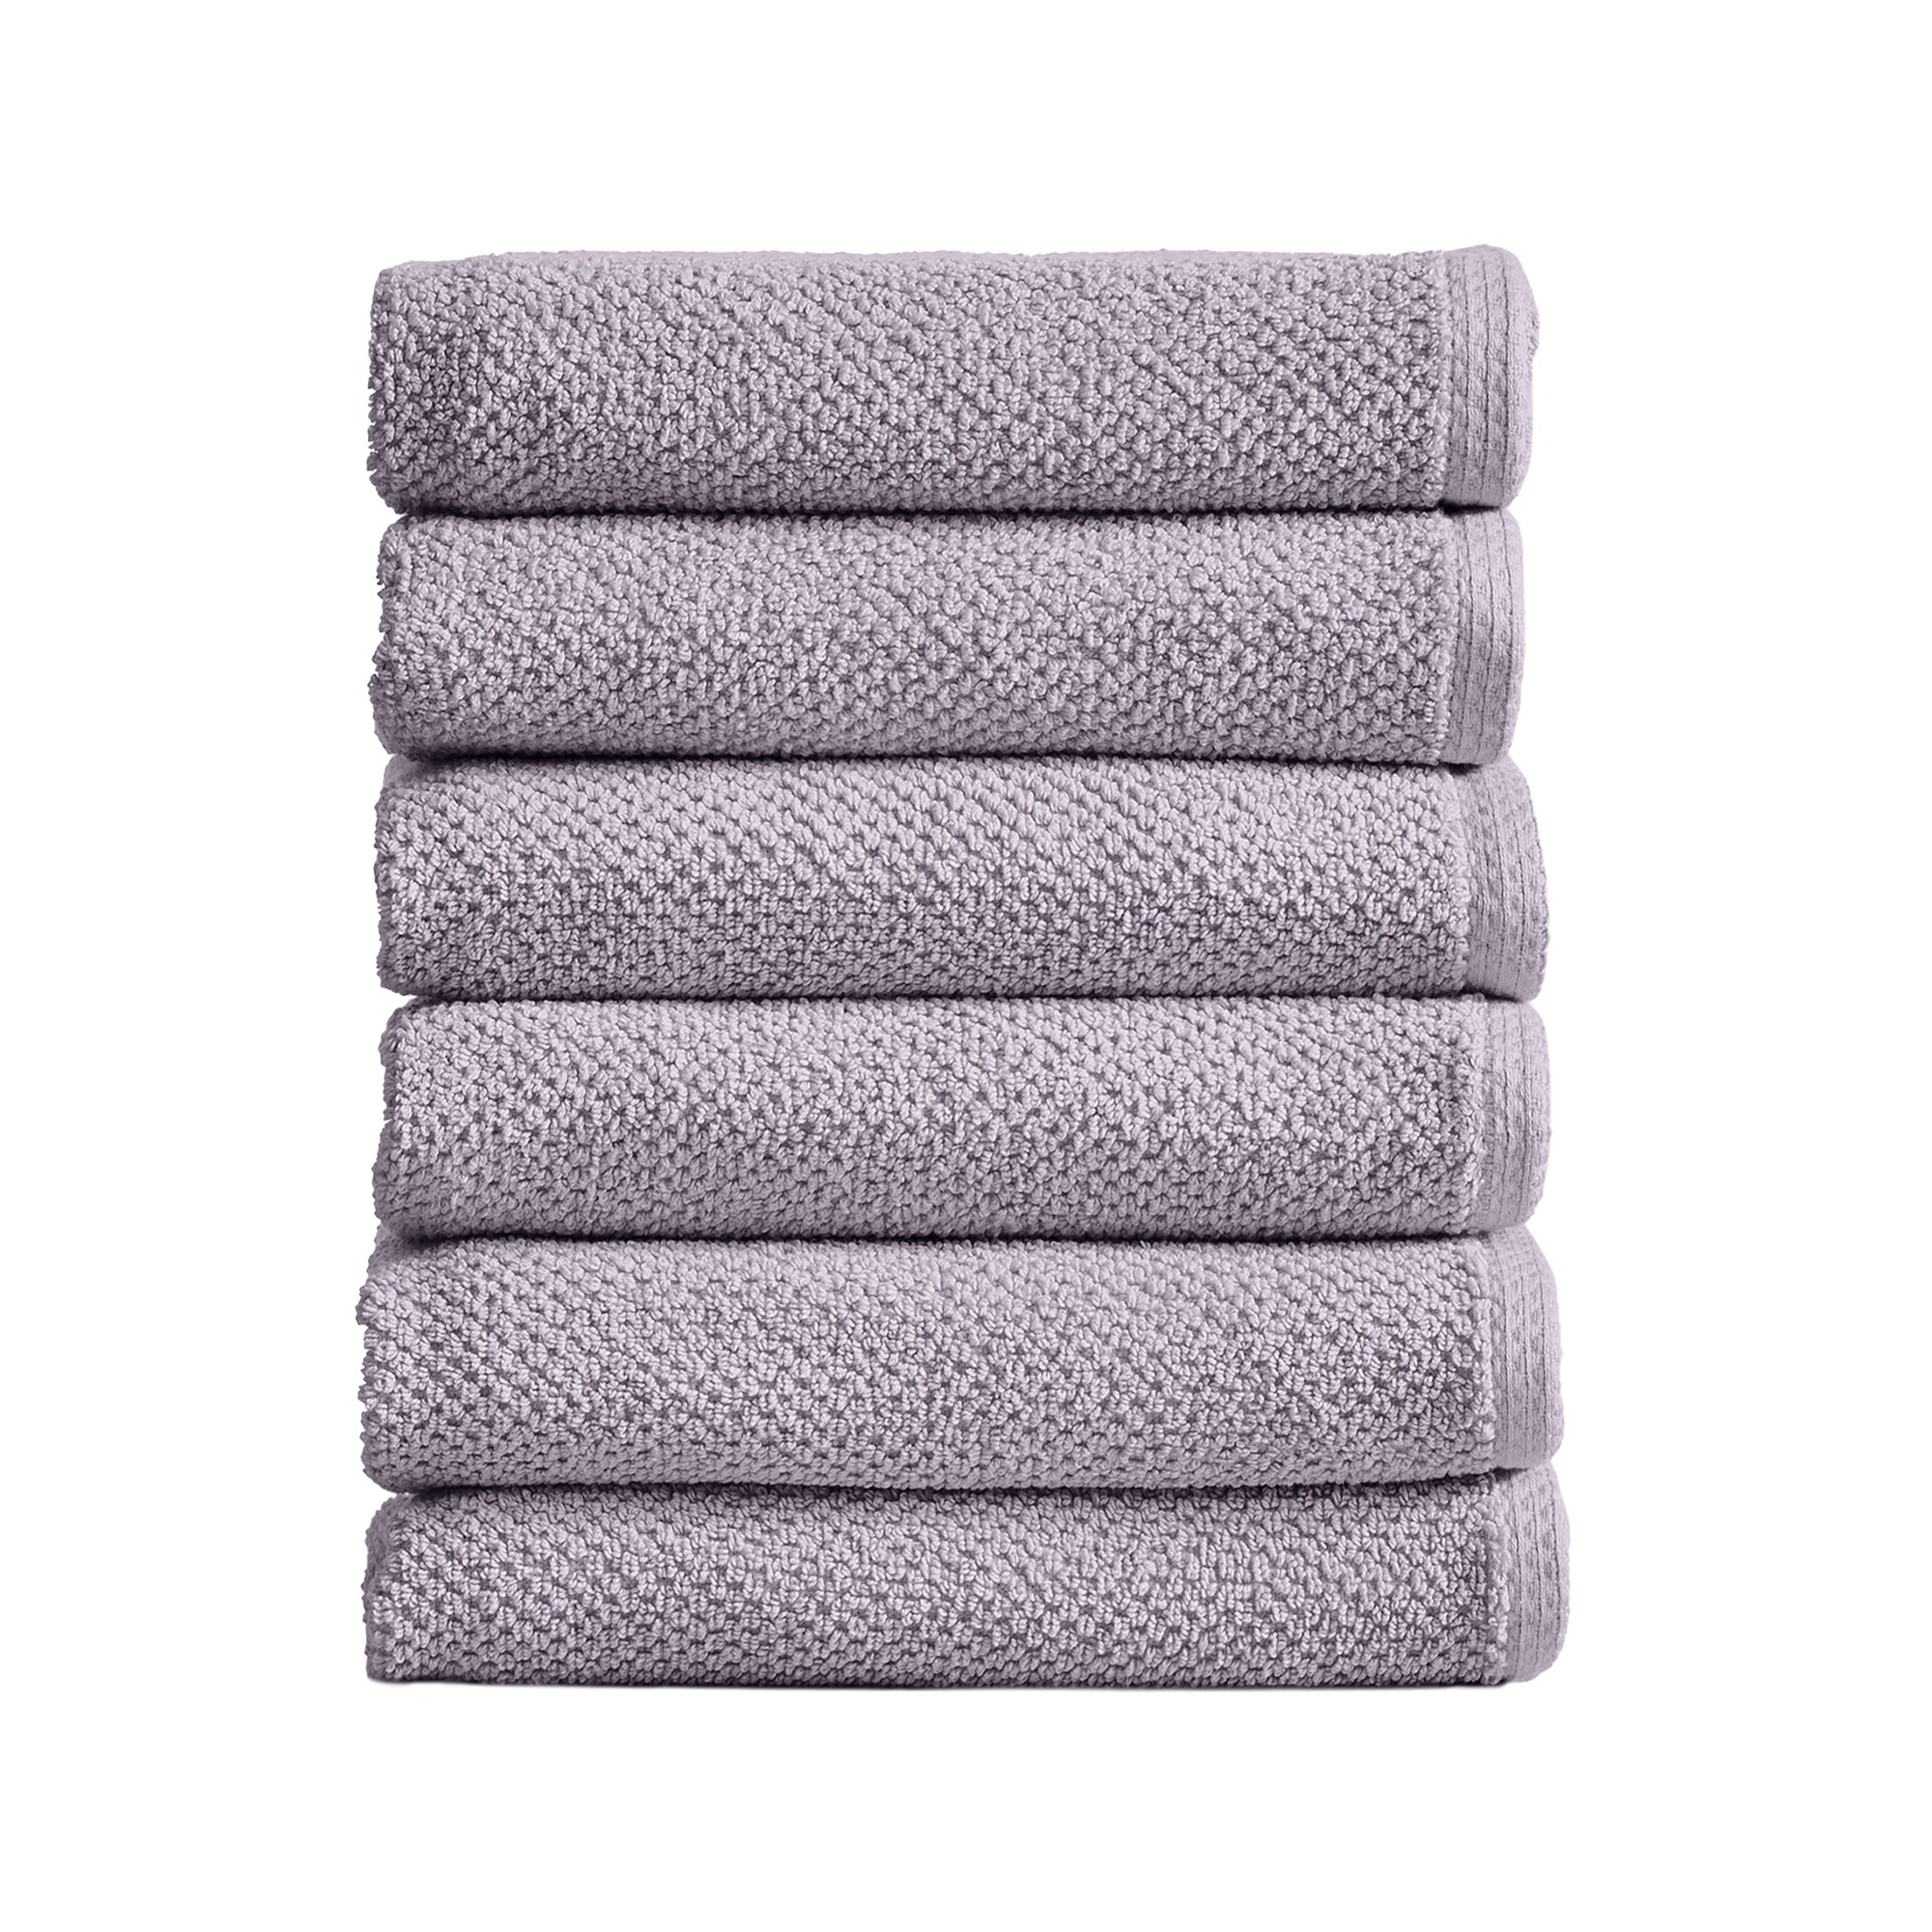 https://ak1.ostkcdn.com/images/products/is/images/direct/f4bd6cbe9a72b5038ff569f269d85239c605864e/Great-Bay-Home-Ultra-Absorbent-Cotton-Popcorn-Towel-Set-Acacia-Collection.jpg